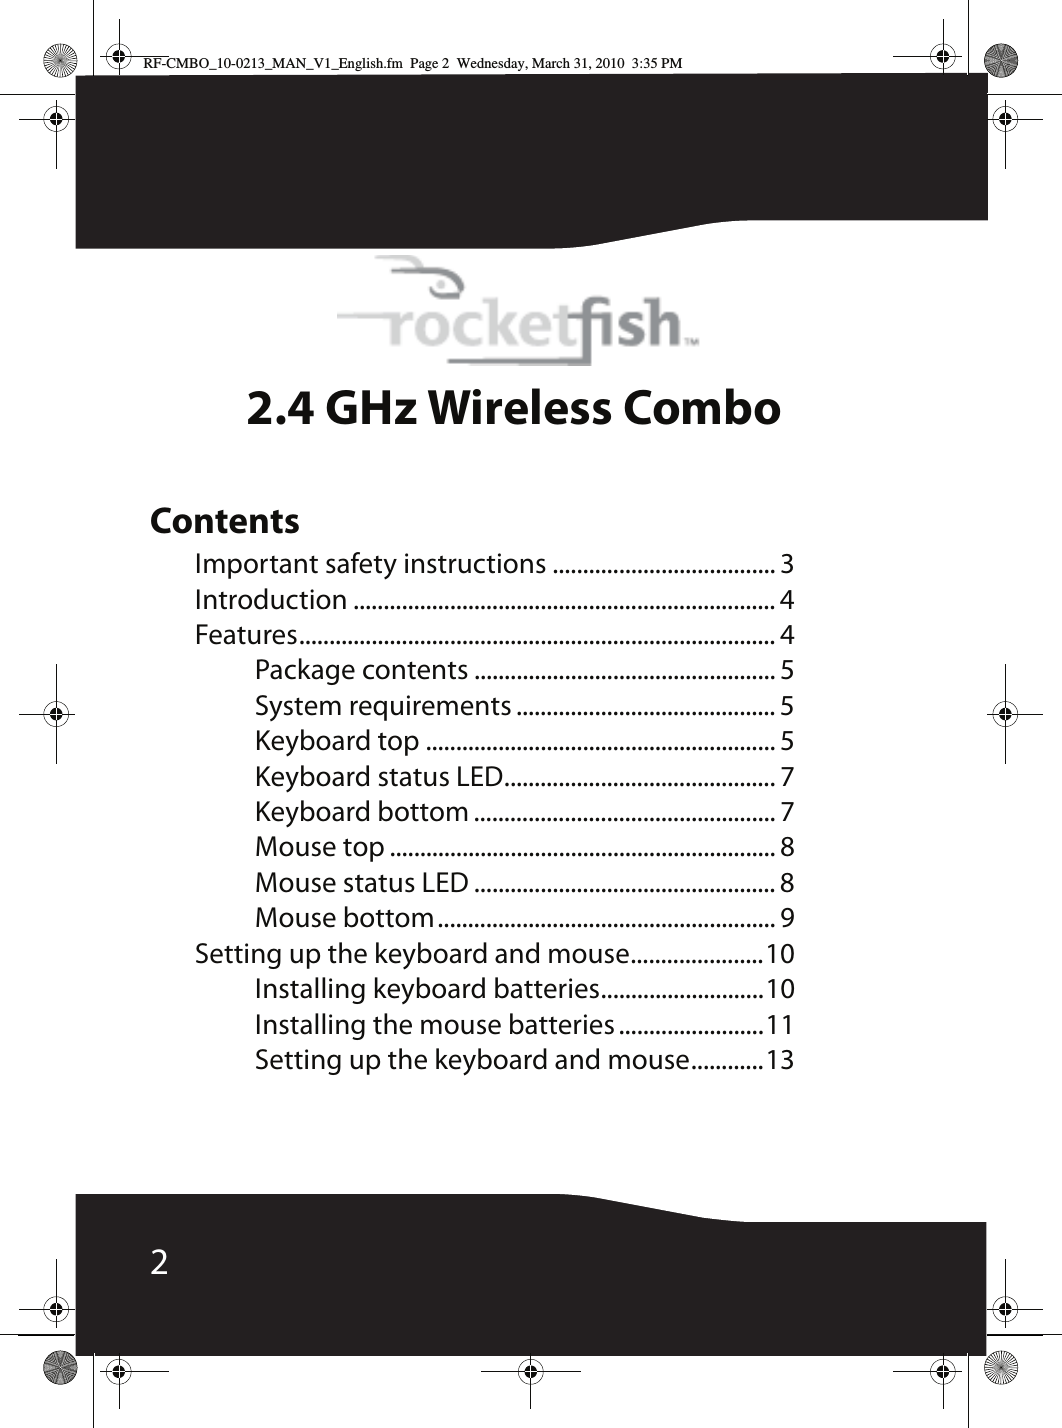 22.4 GHz Wireless ComboContentsImportant safety instructions ..................................... 3Introduction ...................................................................... 4Features............................................................................... 4Package contents .................................................. 5System requirements ........................................... 5Keyboard top .......................................................... 5Keyboard status LED............................................. 7Keyboard bottom .................................................. 7Mouse top ................................................................ 8Mouse status LED .................................................. 8Mouse bottom........................................................ 9Setting up the keyboard and mouse......................10Installing keyboard batteries...........................10Installing the mouse batteries ........................11Setting up the keyboard and mouse............13RF-CMBO_10-0213_MAN_V1_English.fm  Page 2  Wednesday, March 31, 2010  3:35 PM